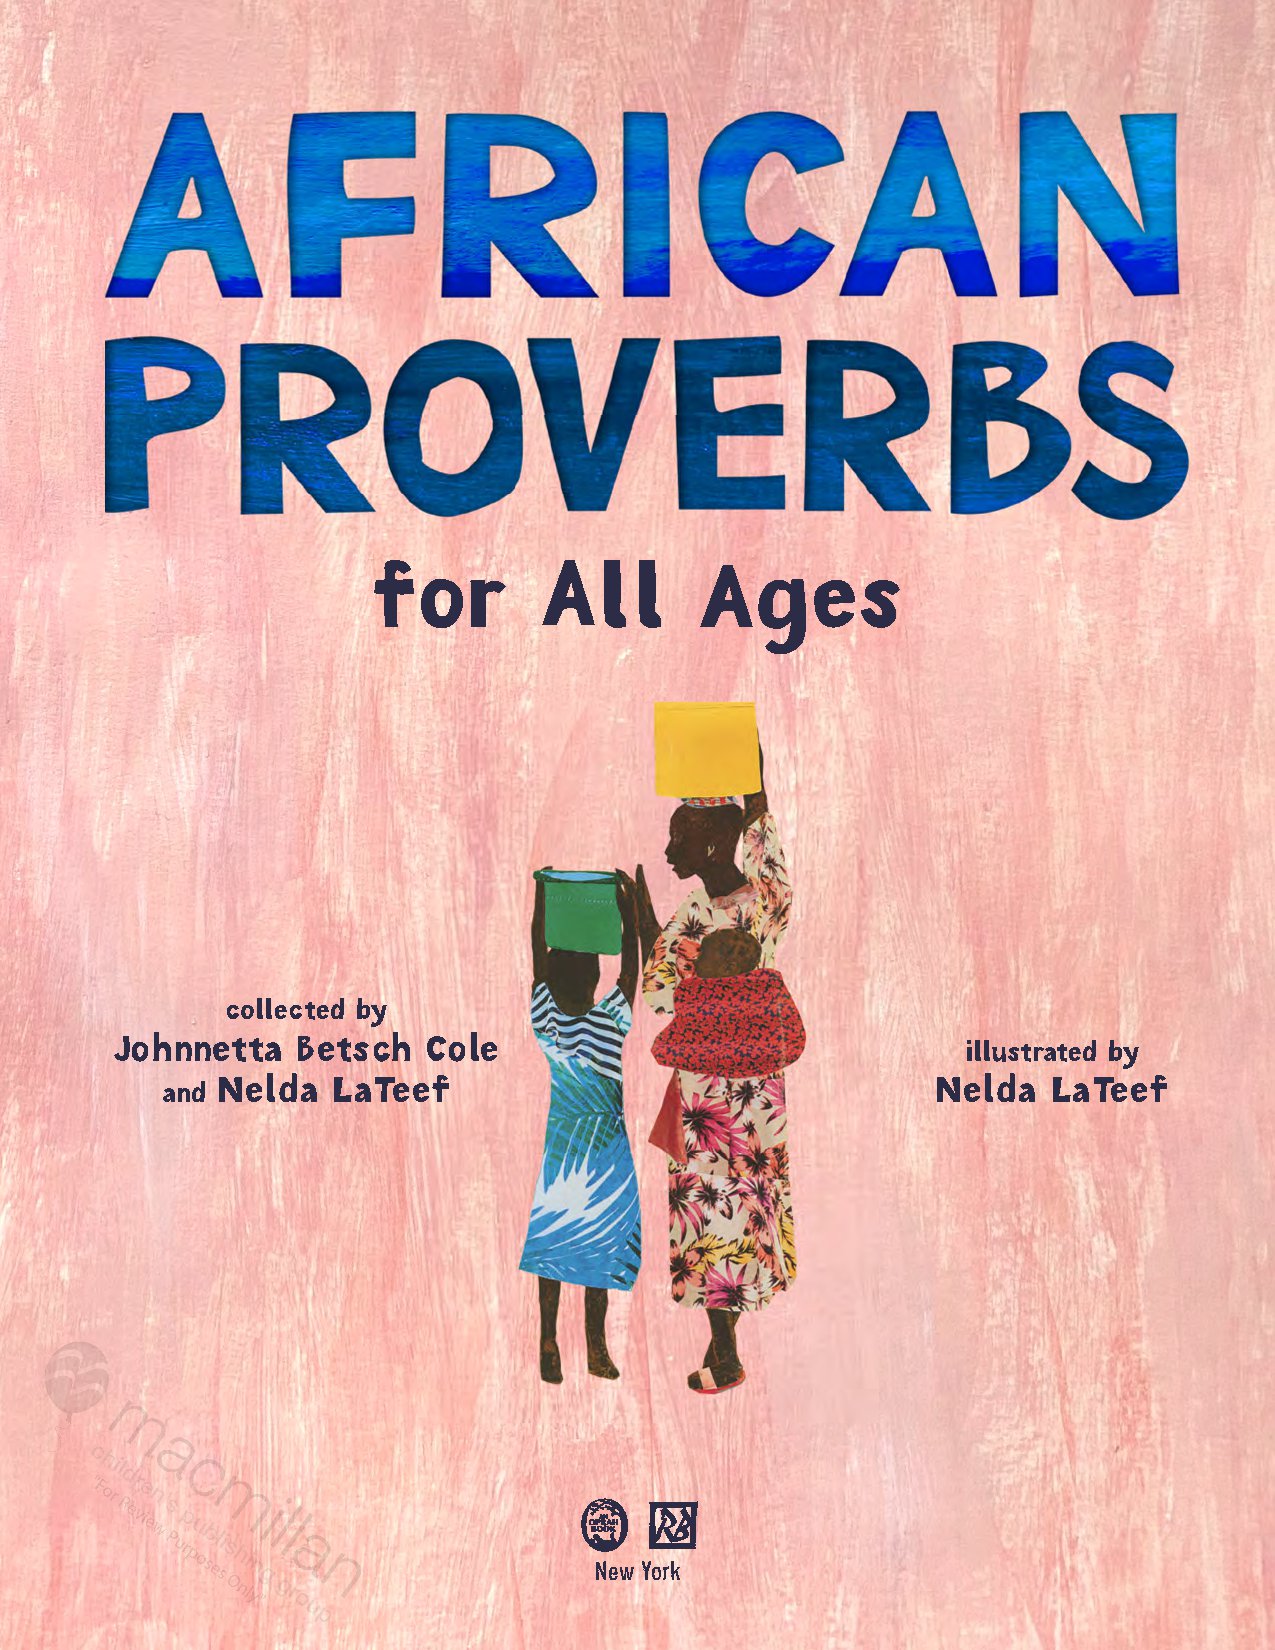 African Proverbs for All Ages